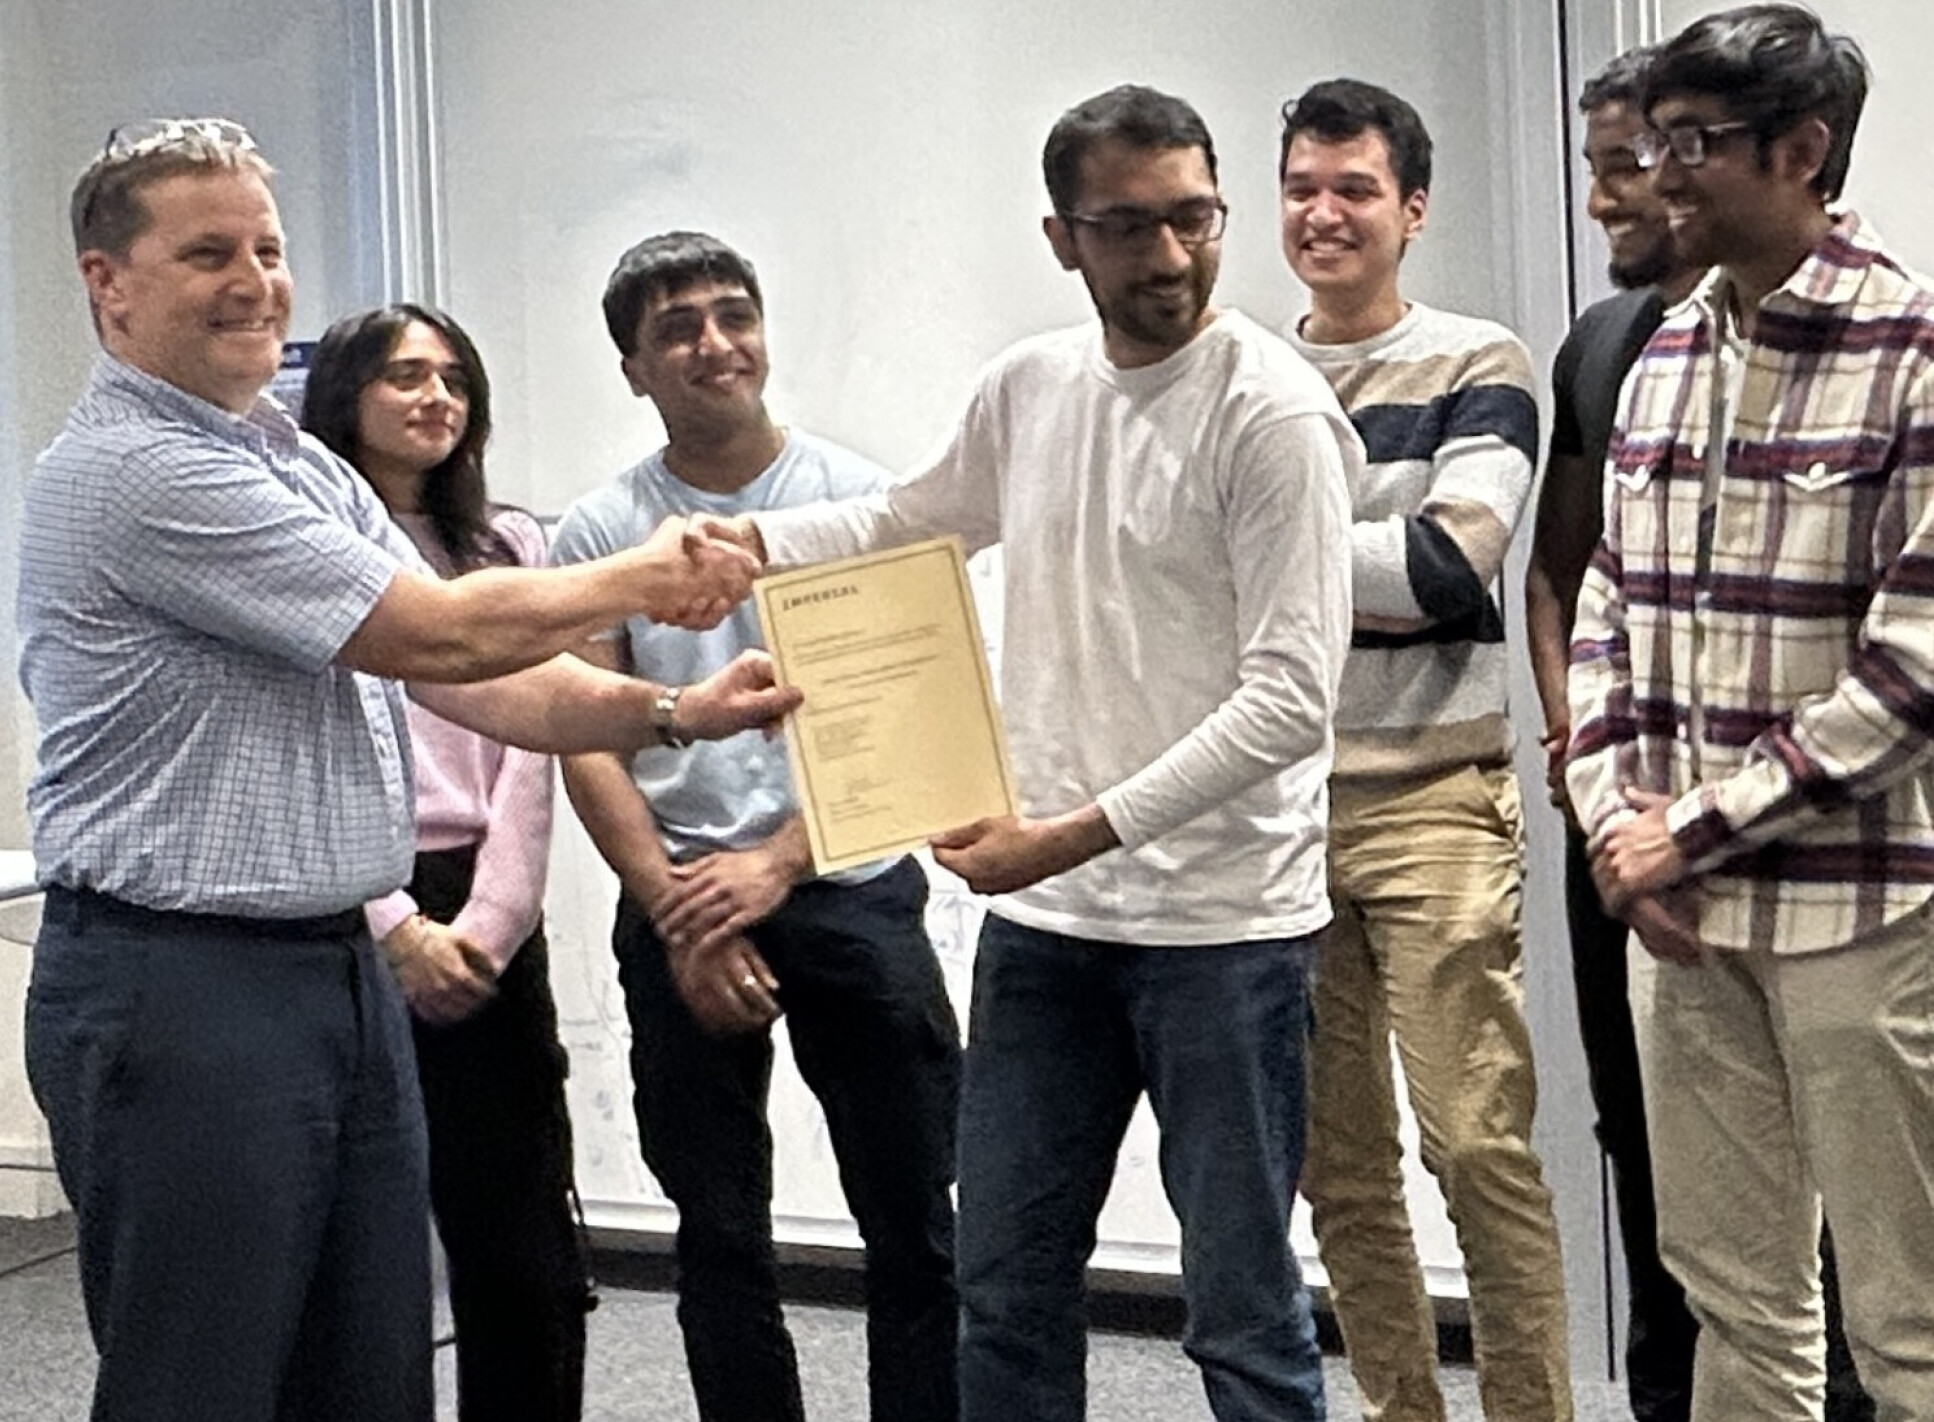 Dr Lee Shaw has presented the ‘Award for Best Optimization’ to MPT Coursework Group 5